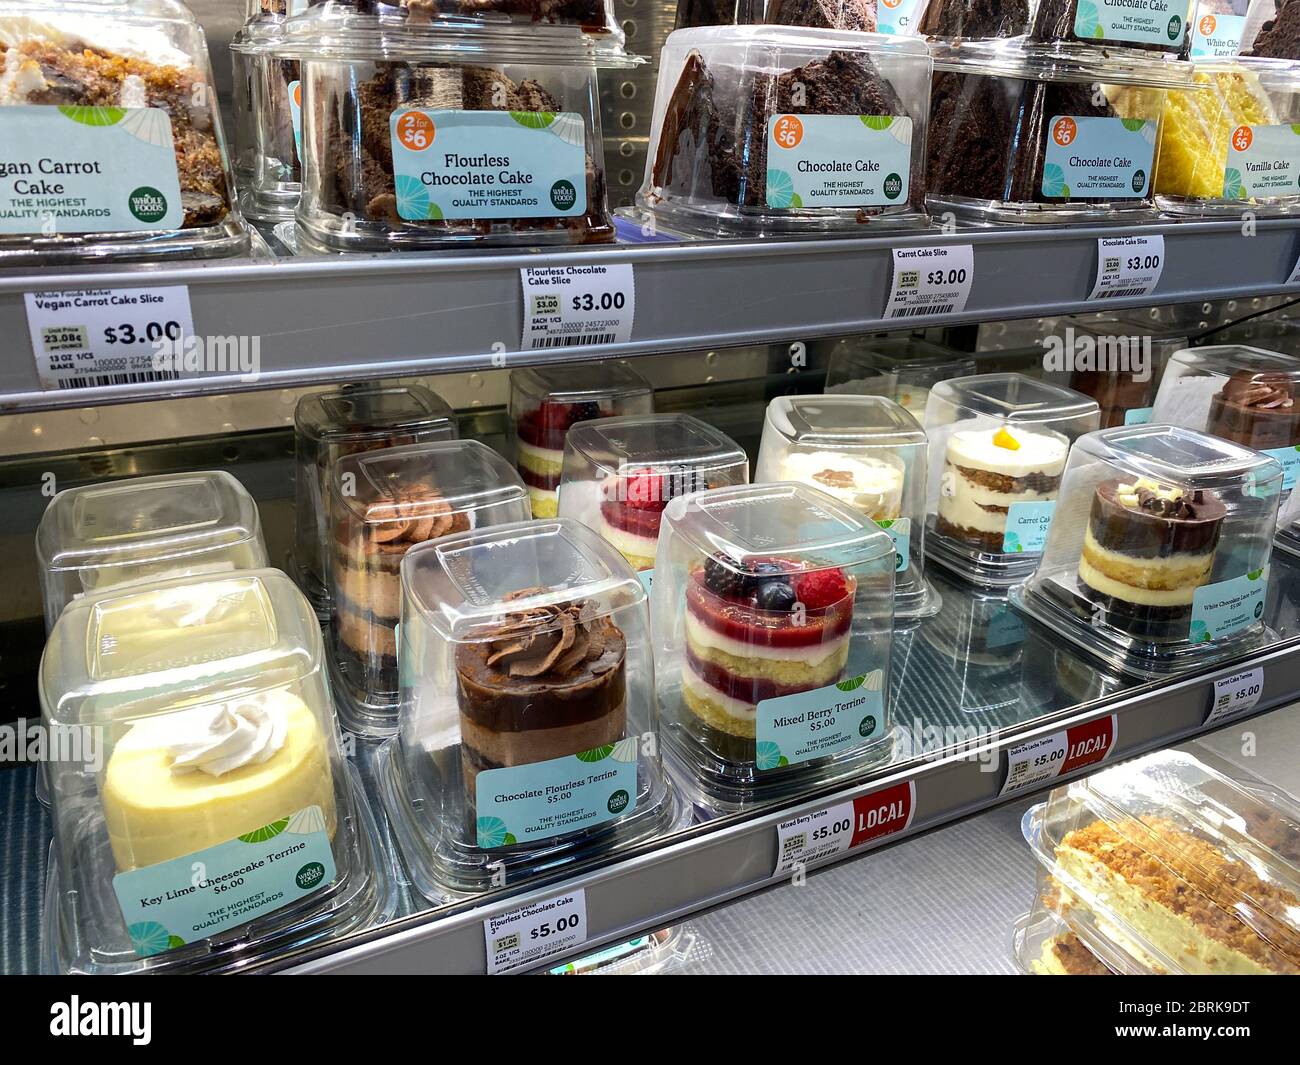 Orlando,FL/USA -5/10/20:  The refridgerated cake case of a Whole Foods Market grocery store with a variety of cakes for sale. Stock Photo